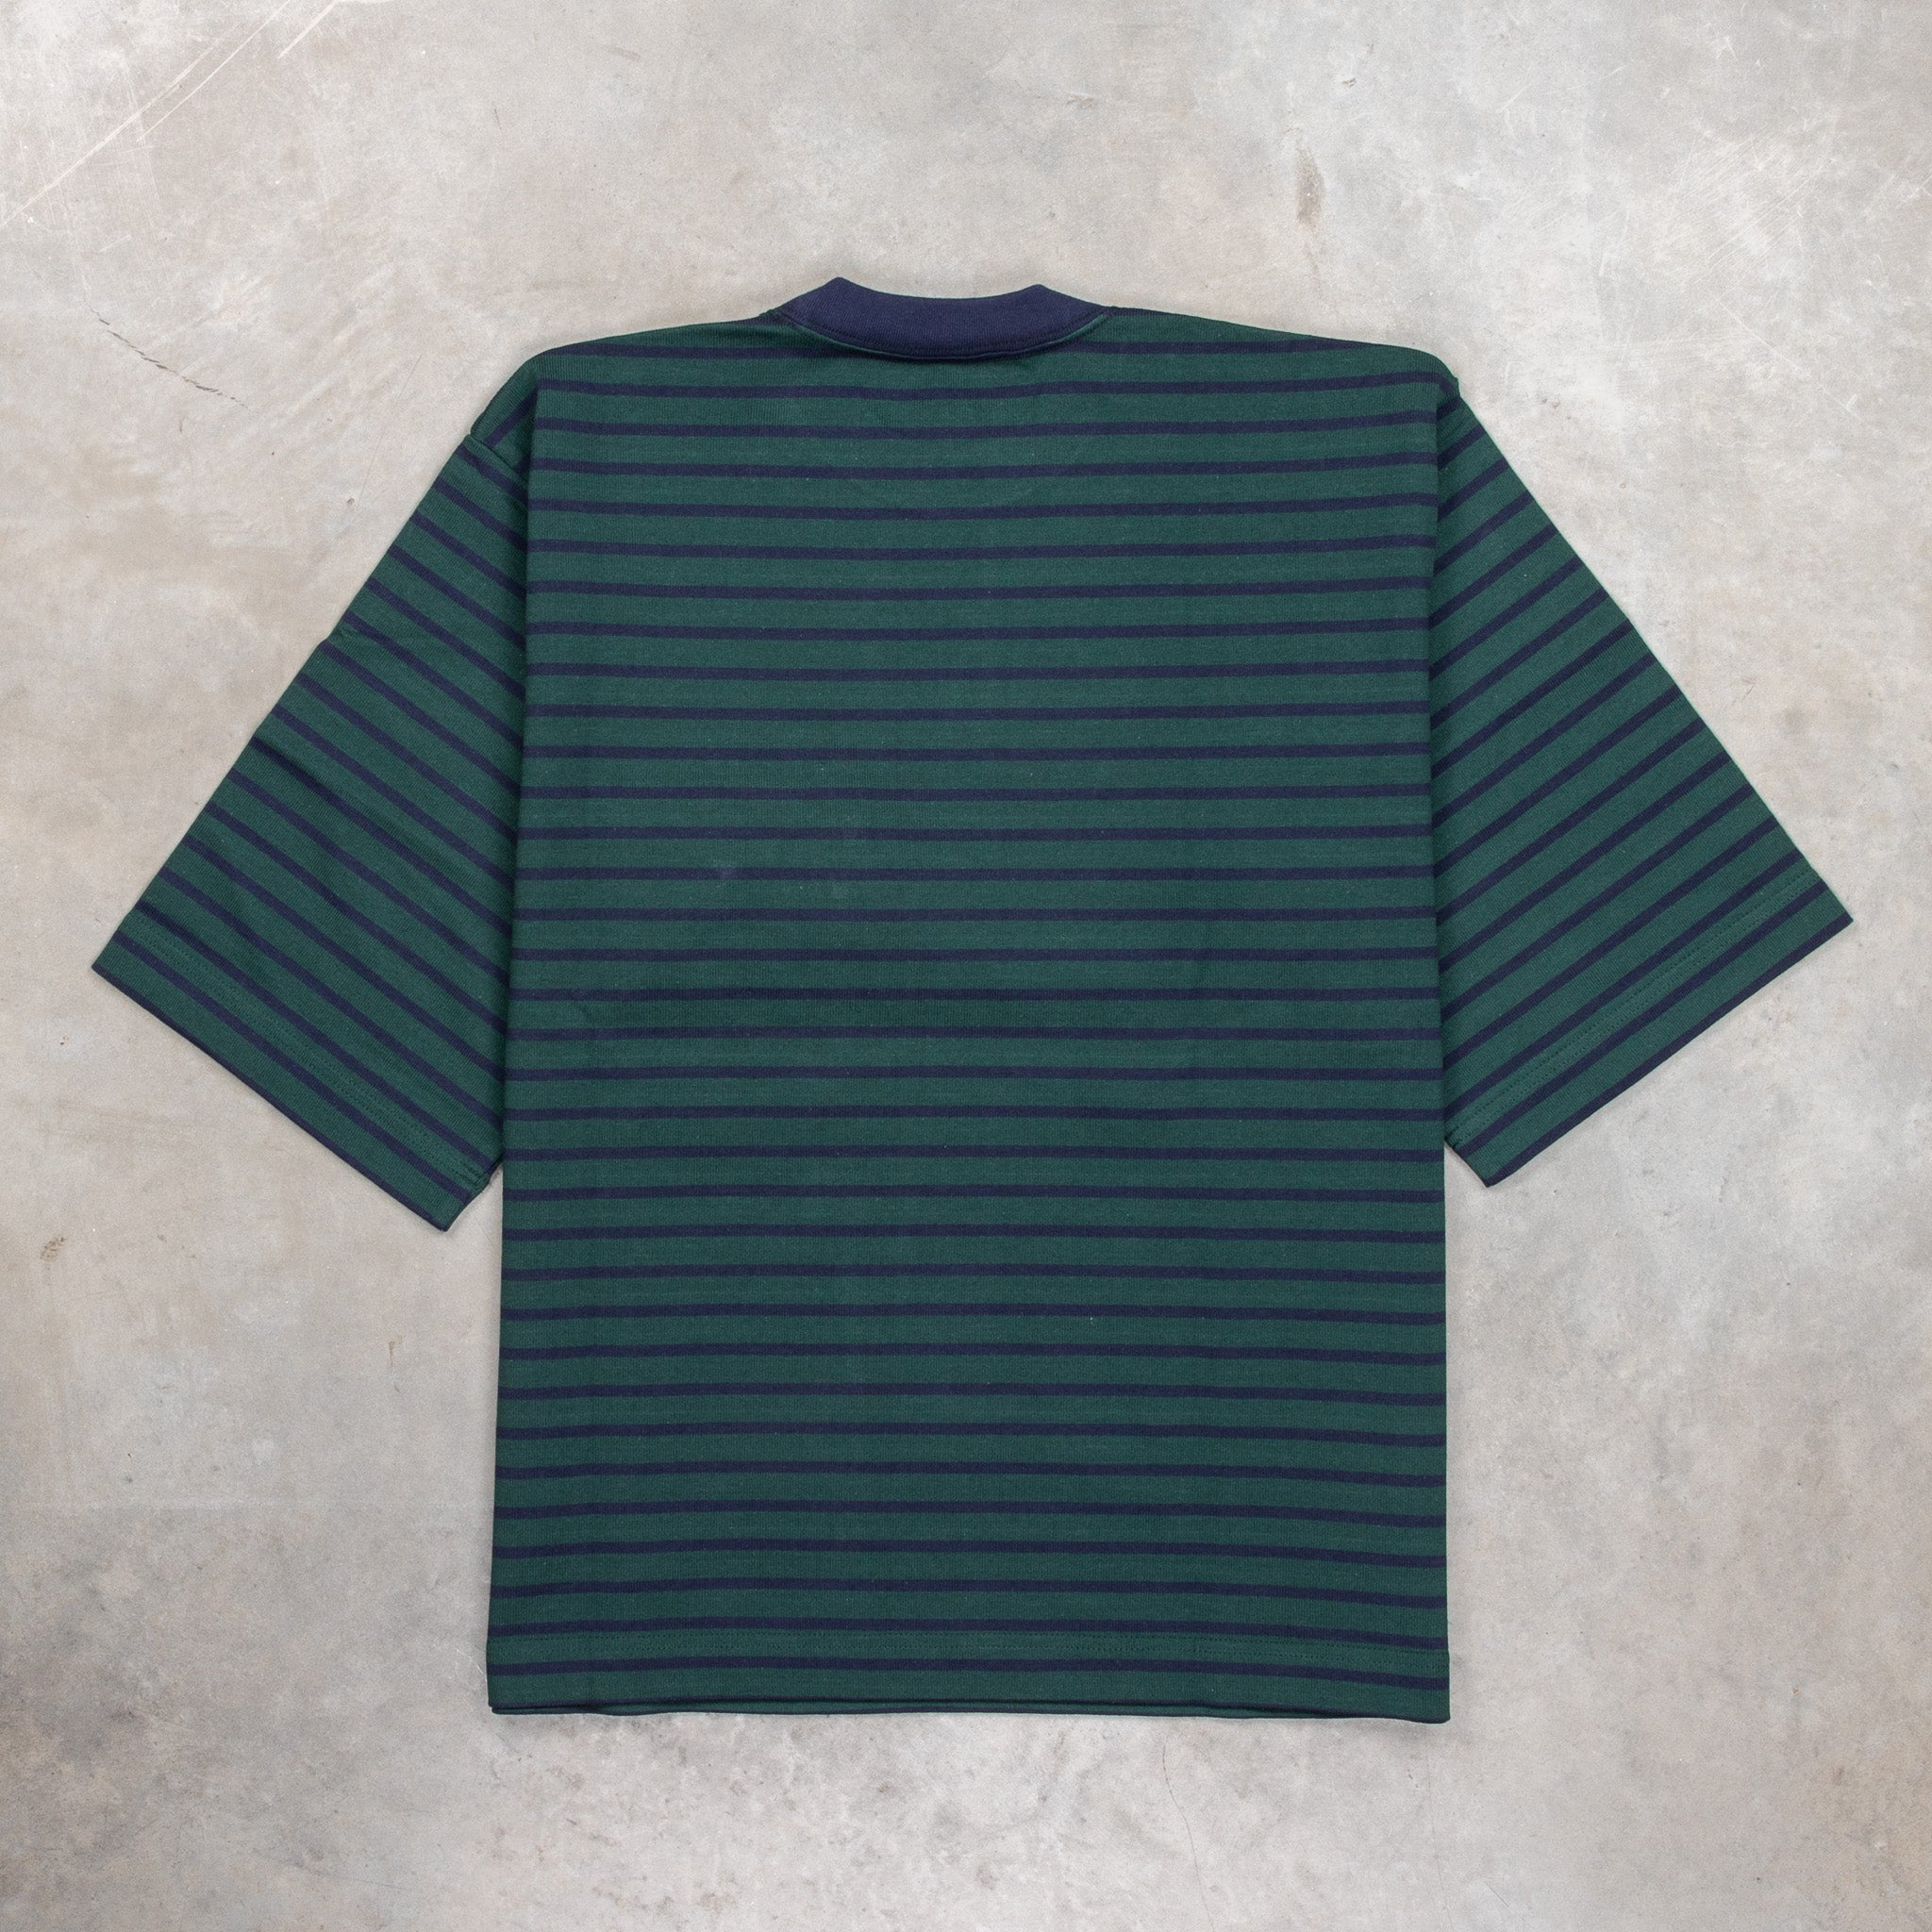 And Wander Stripe Pocket H/S Tee Green